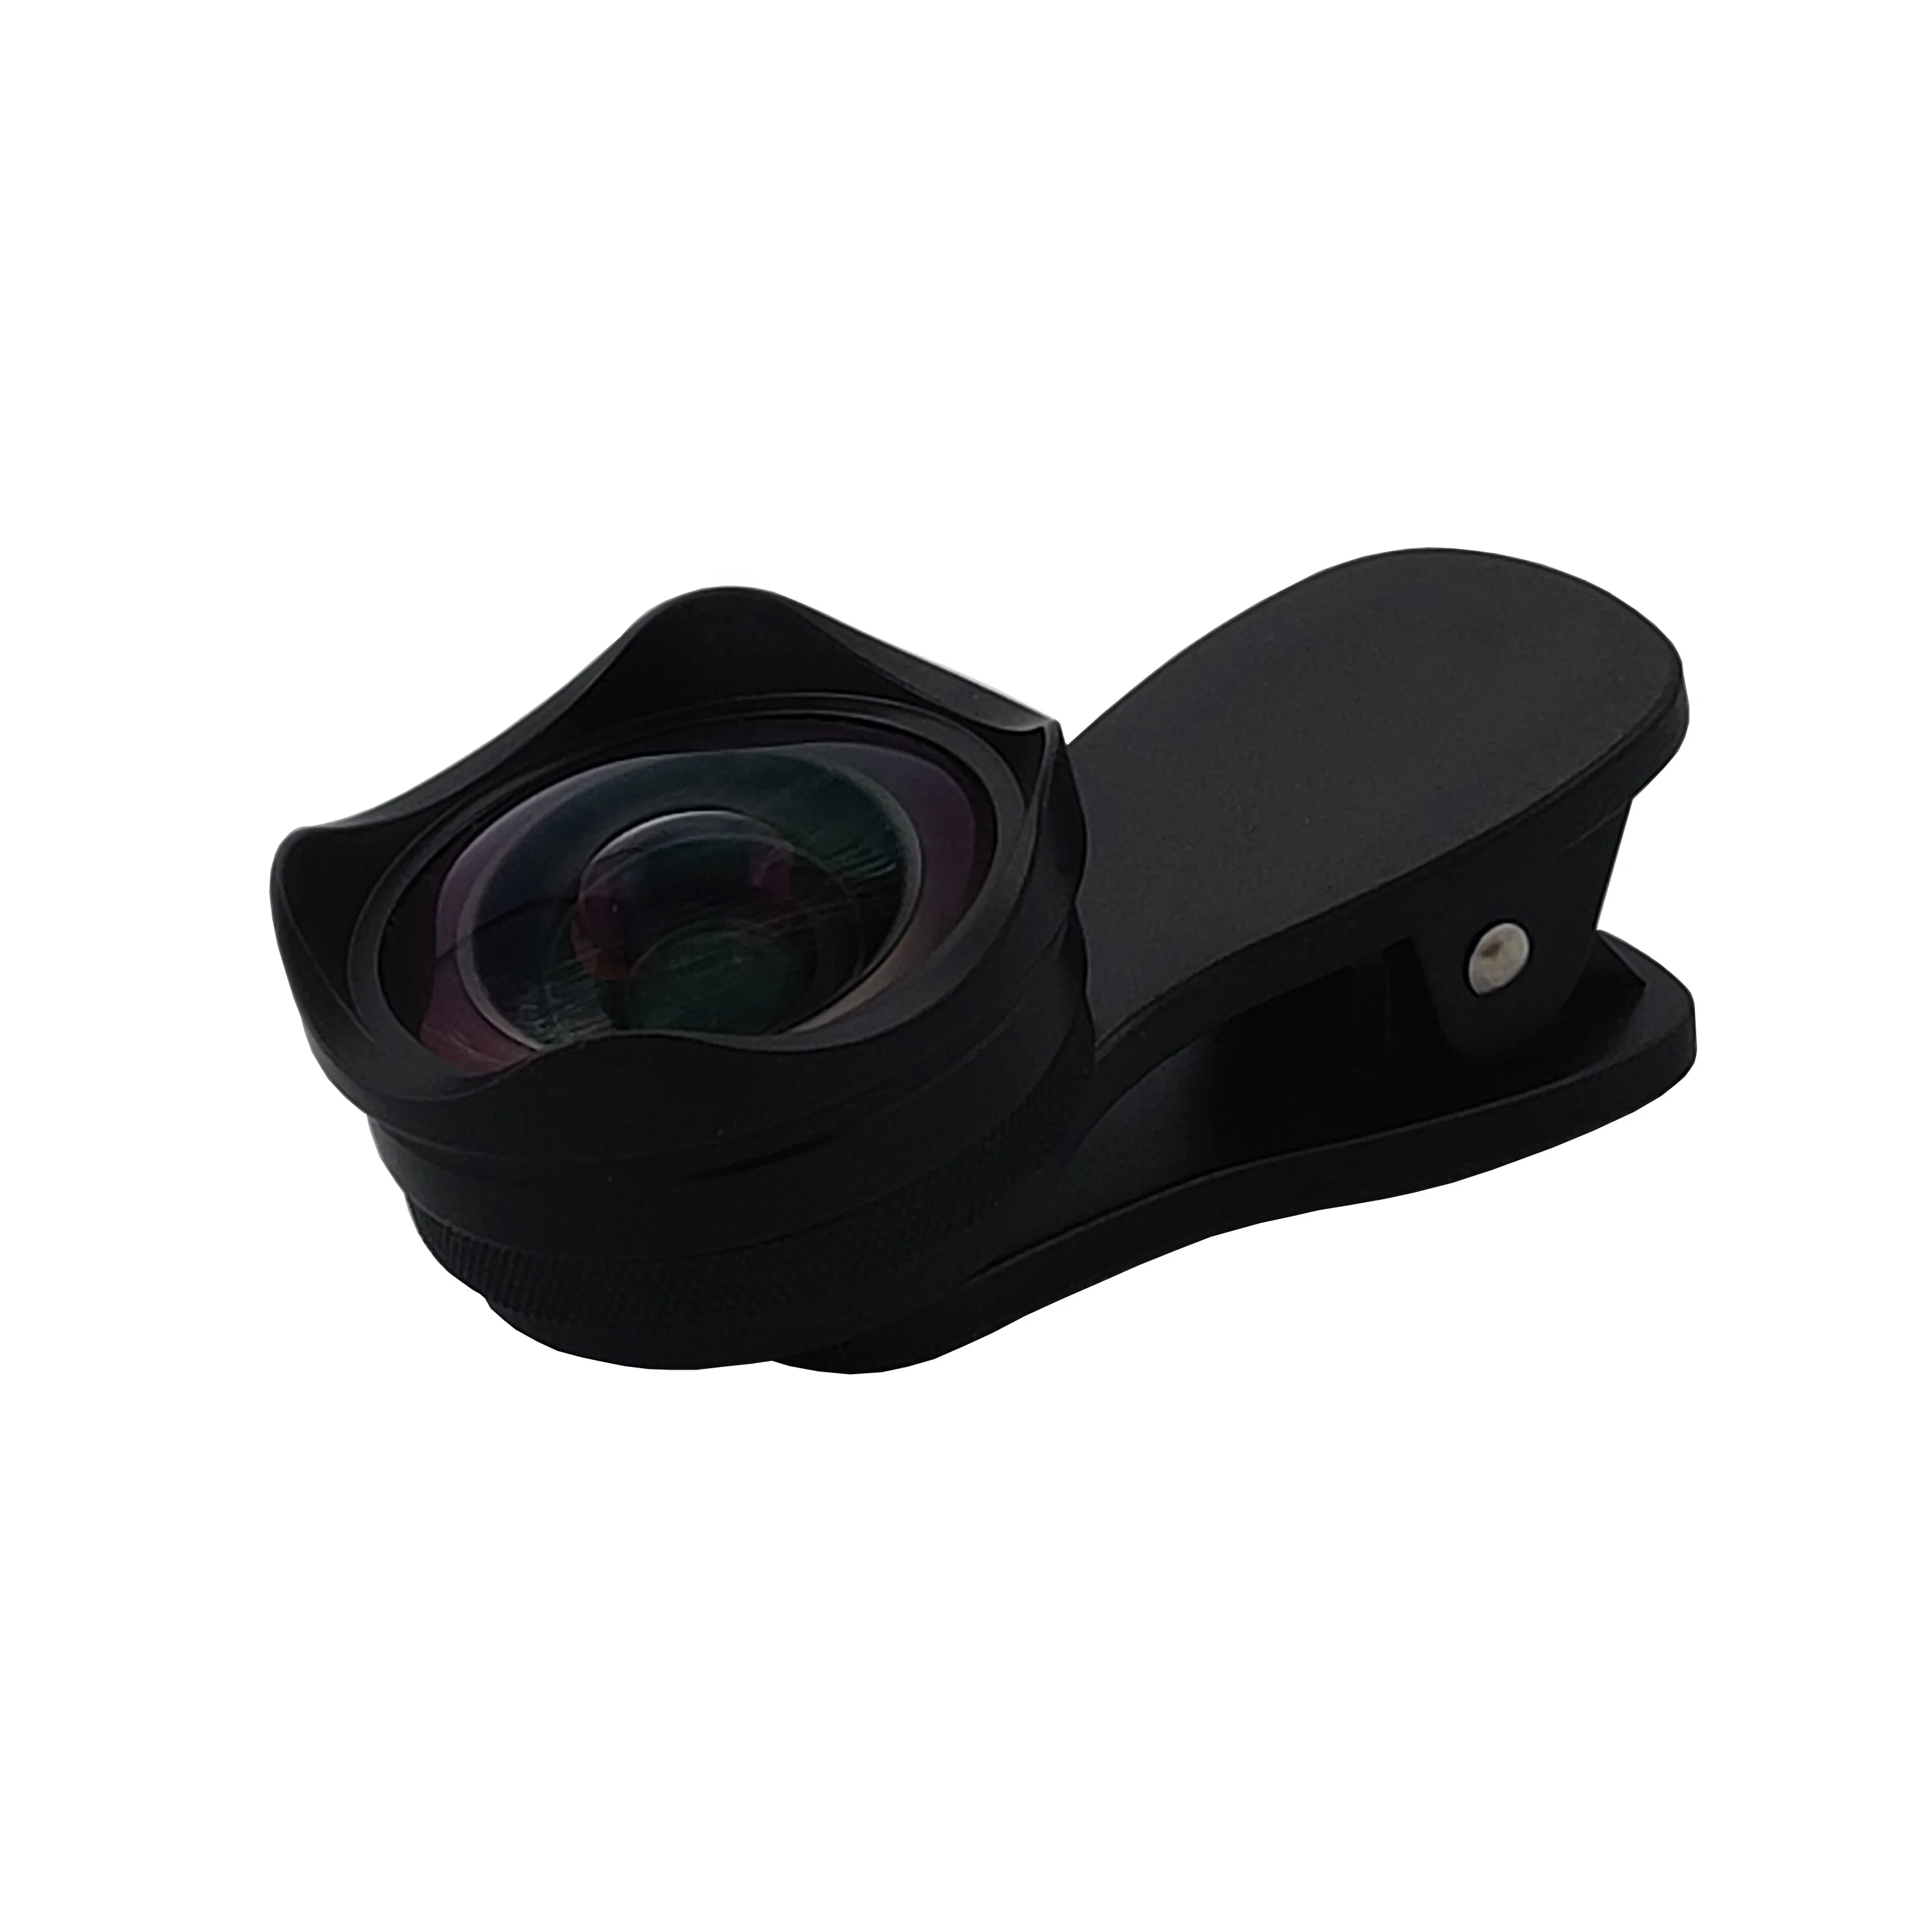 

High Quality 4k Hd Camera Lens Factory Mobile Phone 120 Degree 0.6x Wide Angle 15x Macro Lens For Iphone, Black